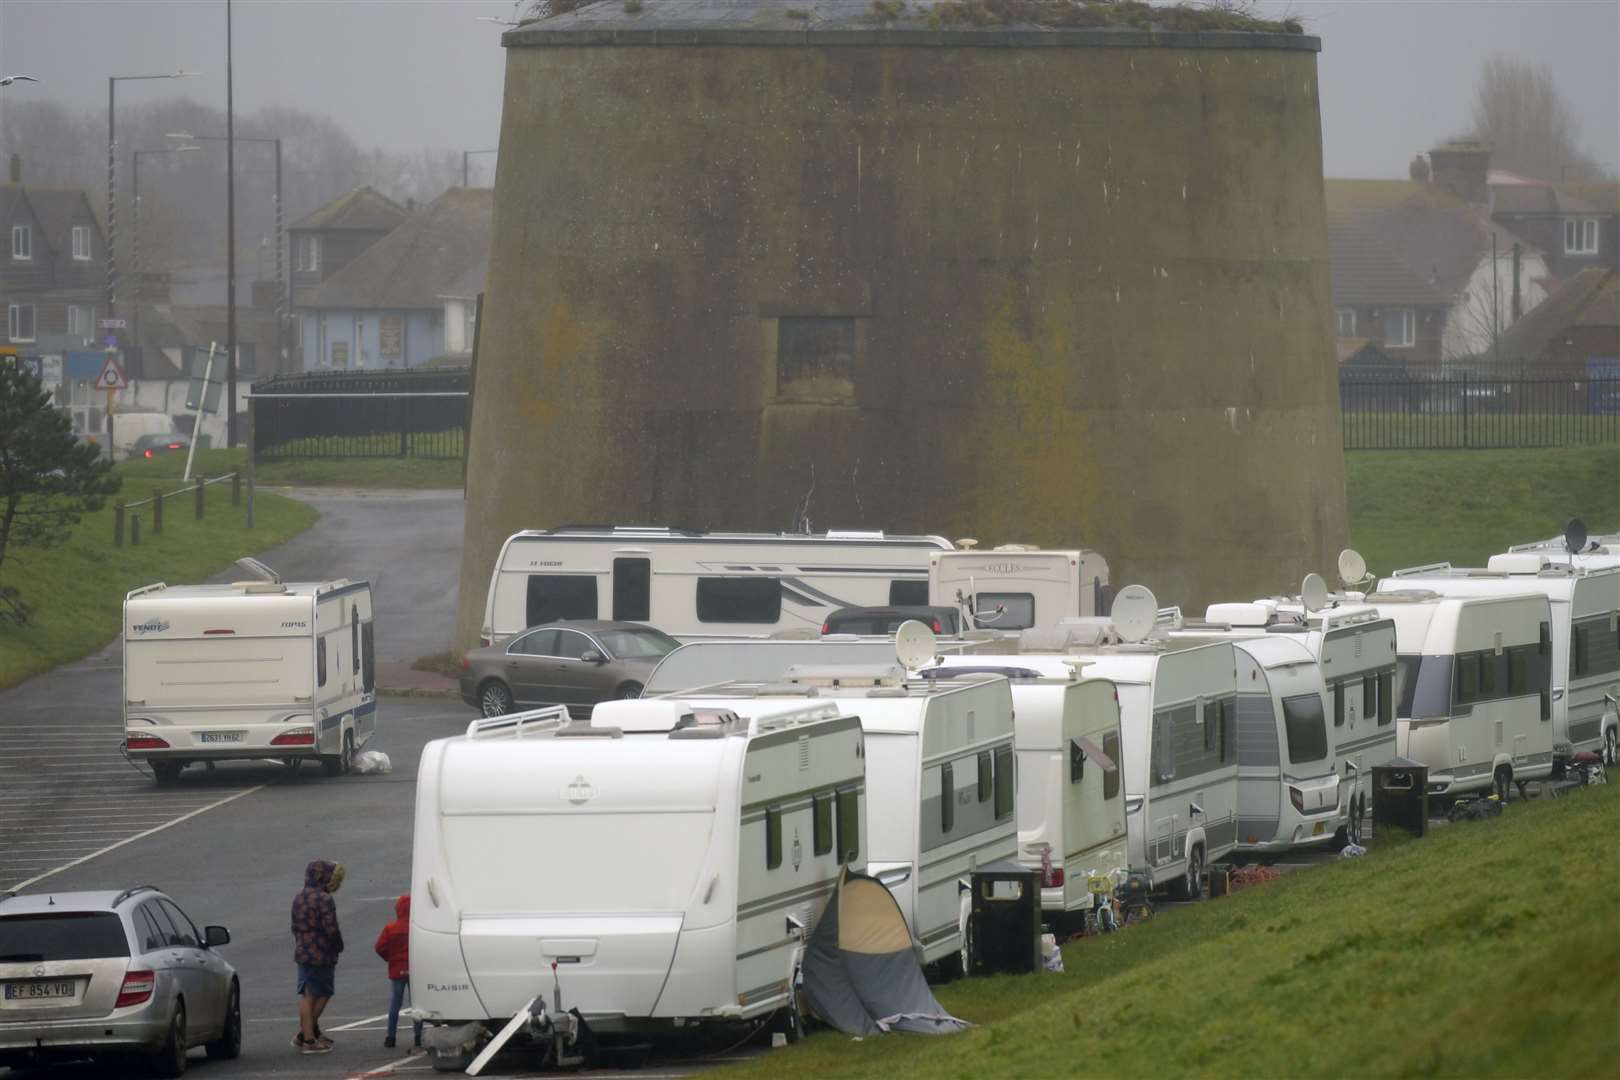 Caravans, all with foreign number plates, have pitched up in the car park. Picture: Barry Goodwin